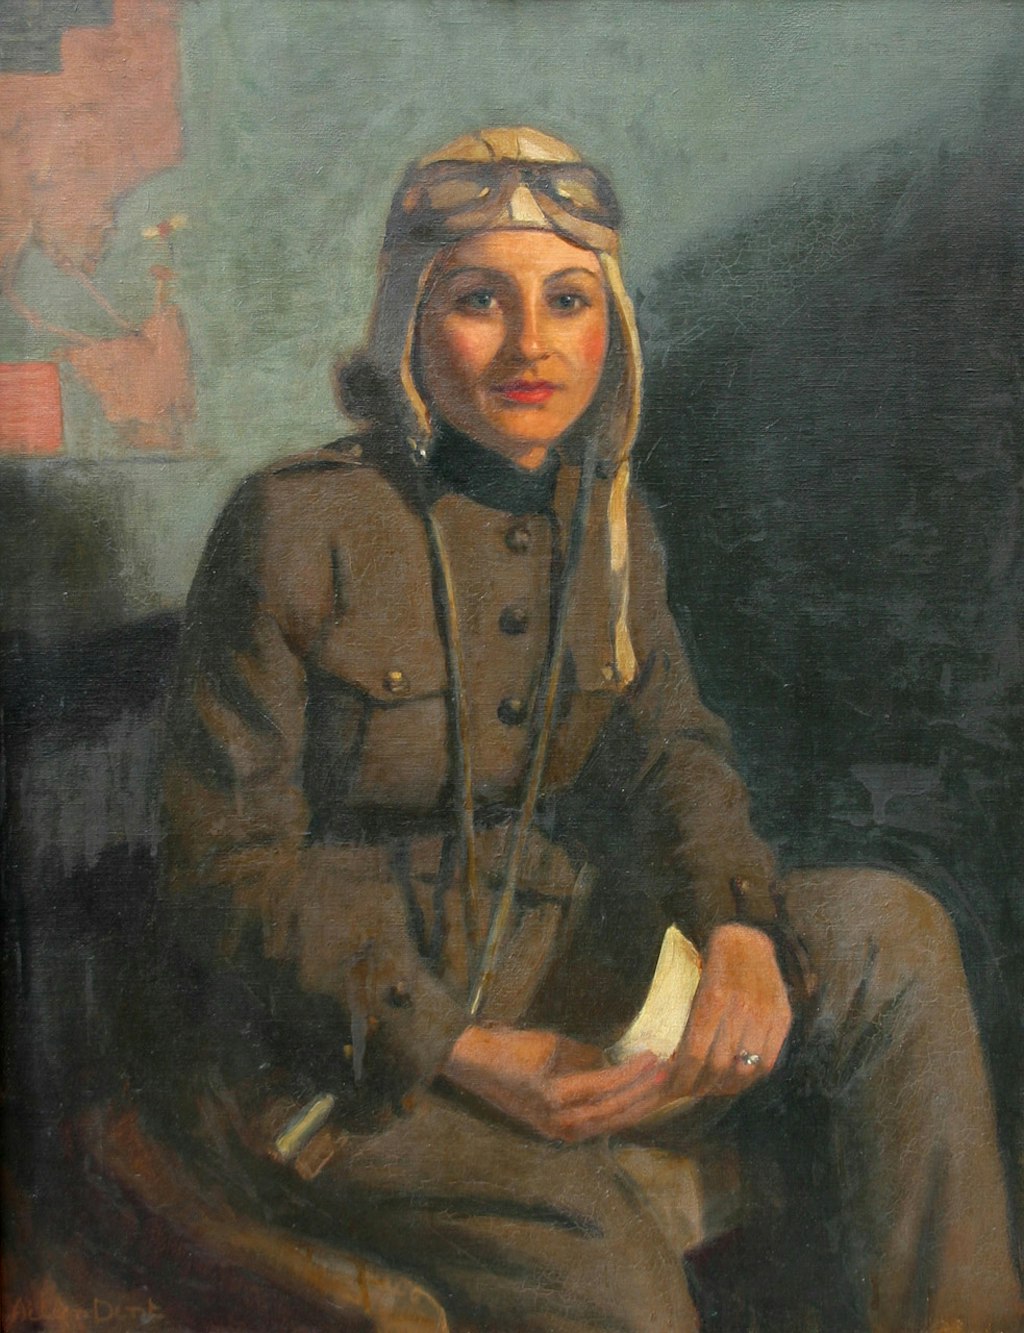 Seated woman wearing aviator's overalls and unstrapped flying helmet with goggles perched on her forehead. She is holding a piece of paper in her hands.